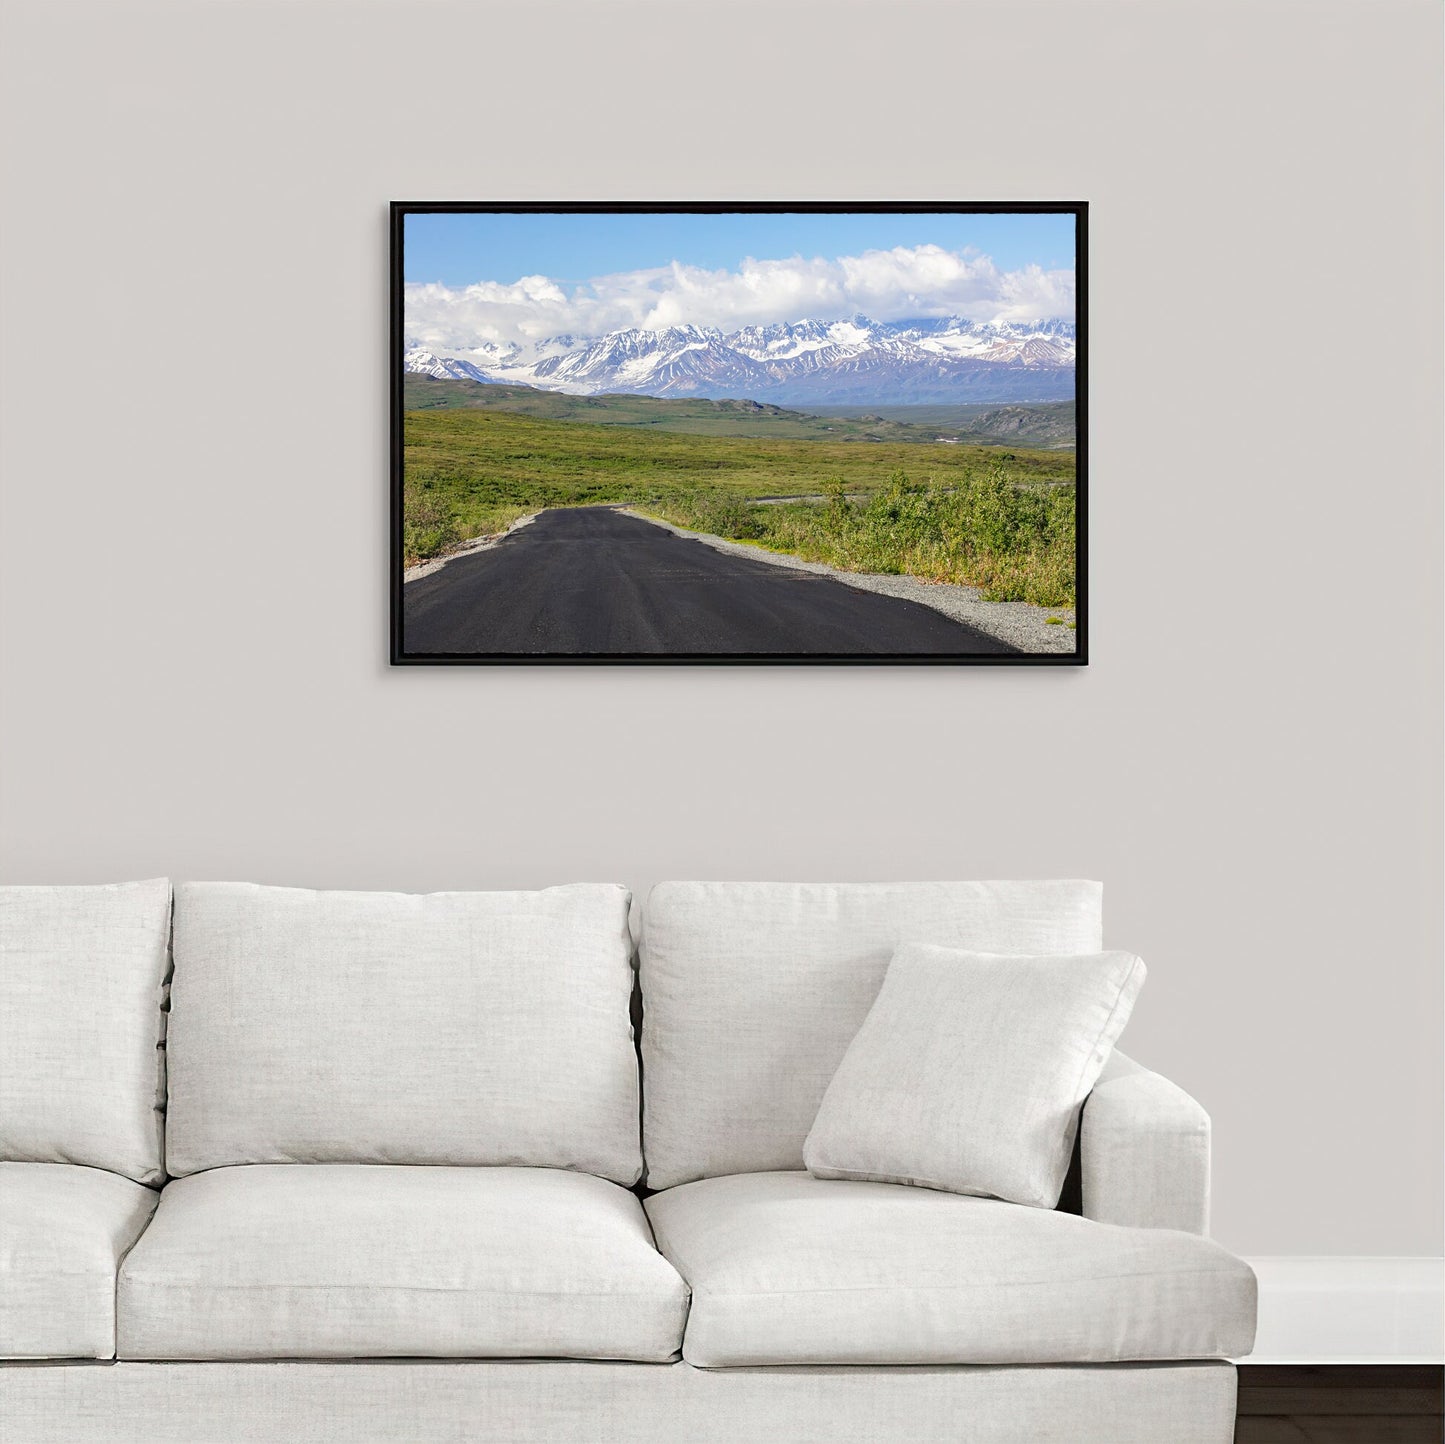 Alaska photo print, Denali Highway photo, mountains photography, Alaska wall art decor, large paper or canvas picture, 5x7 to 40x60"